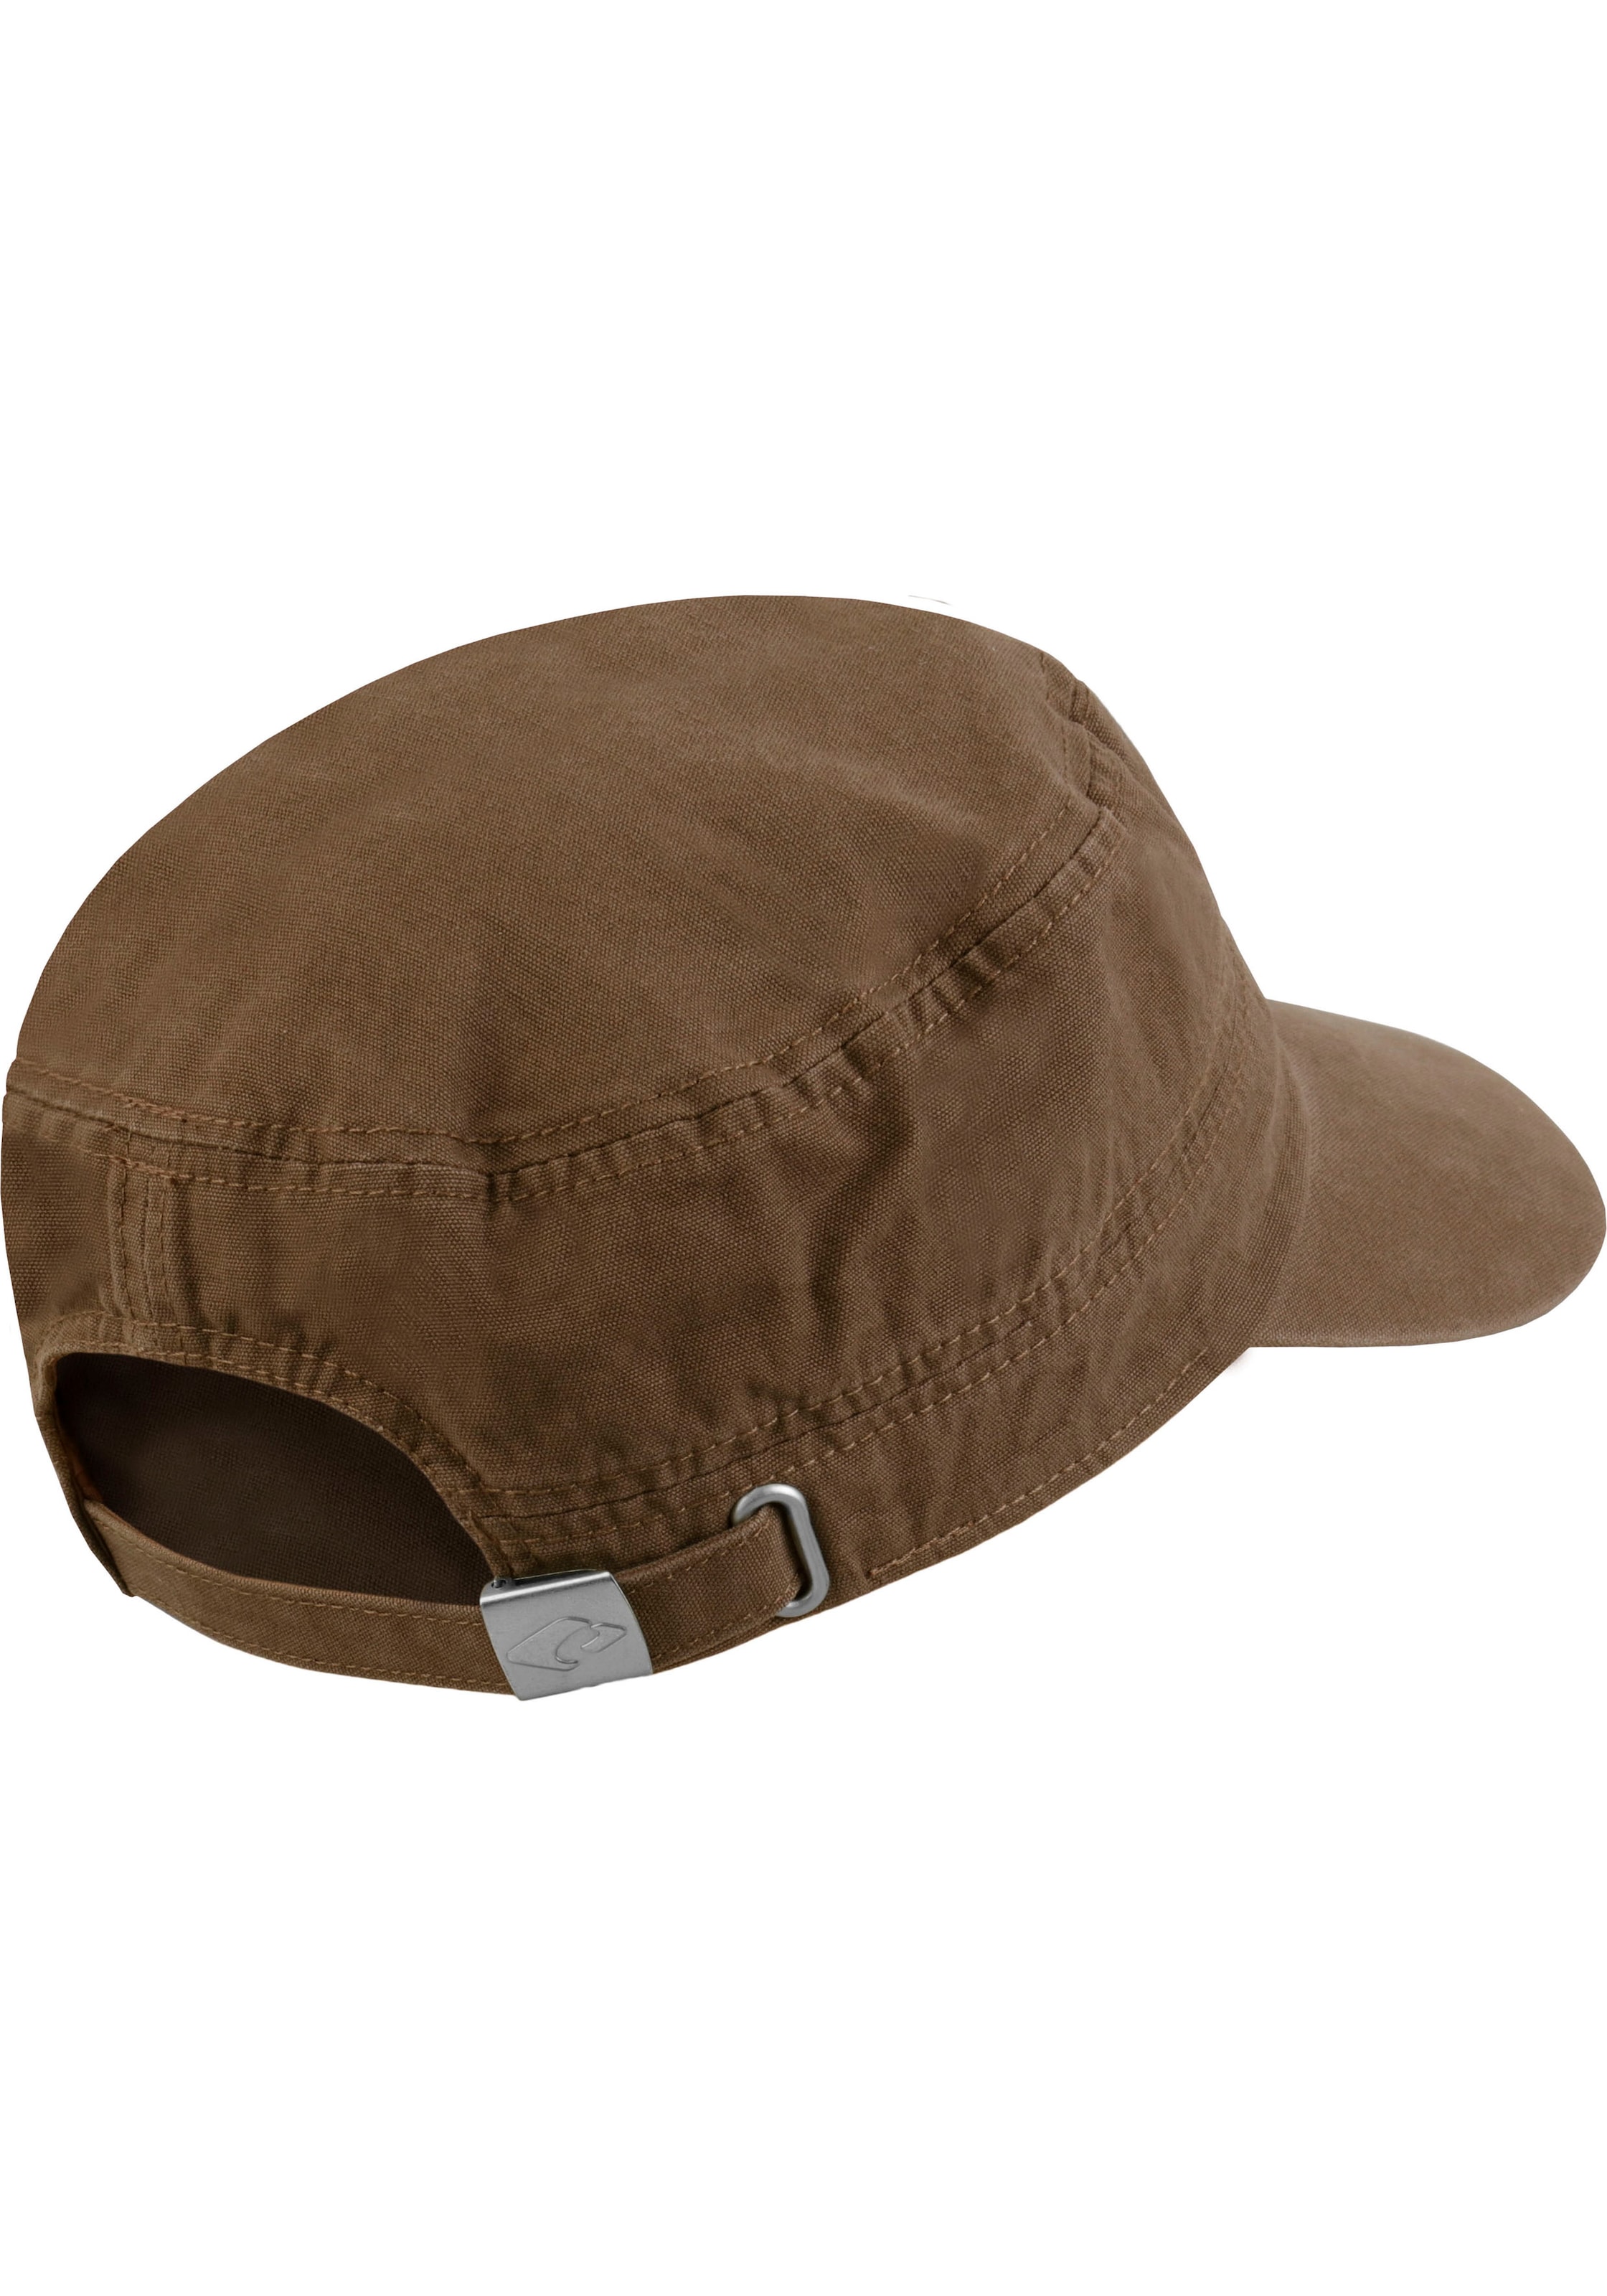 chillouts Army Cap »Dublin Hat« bei